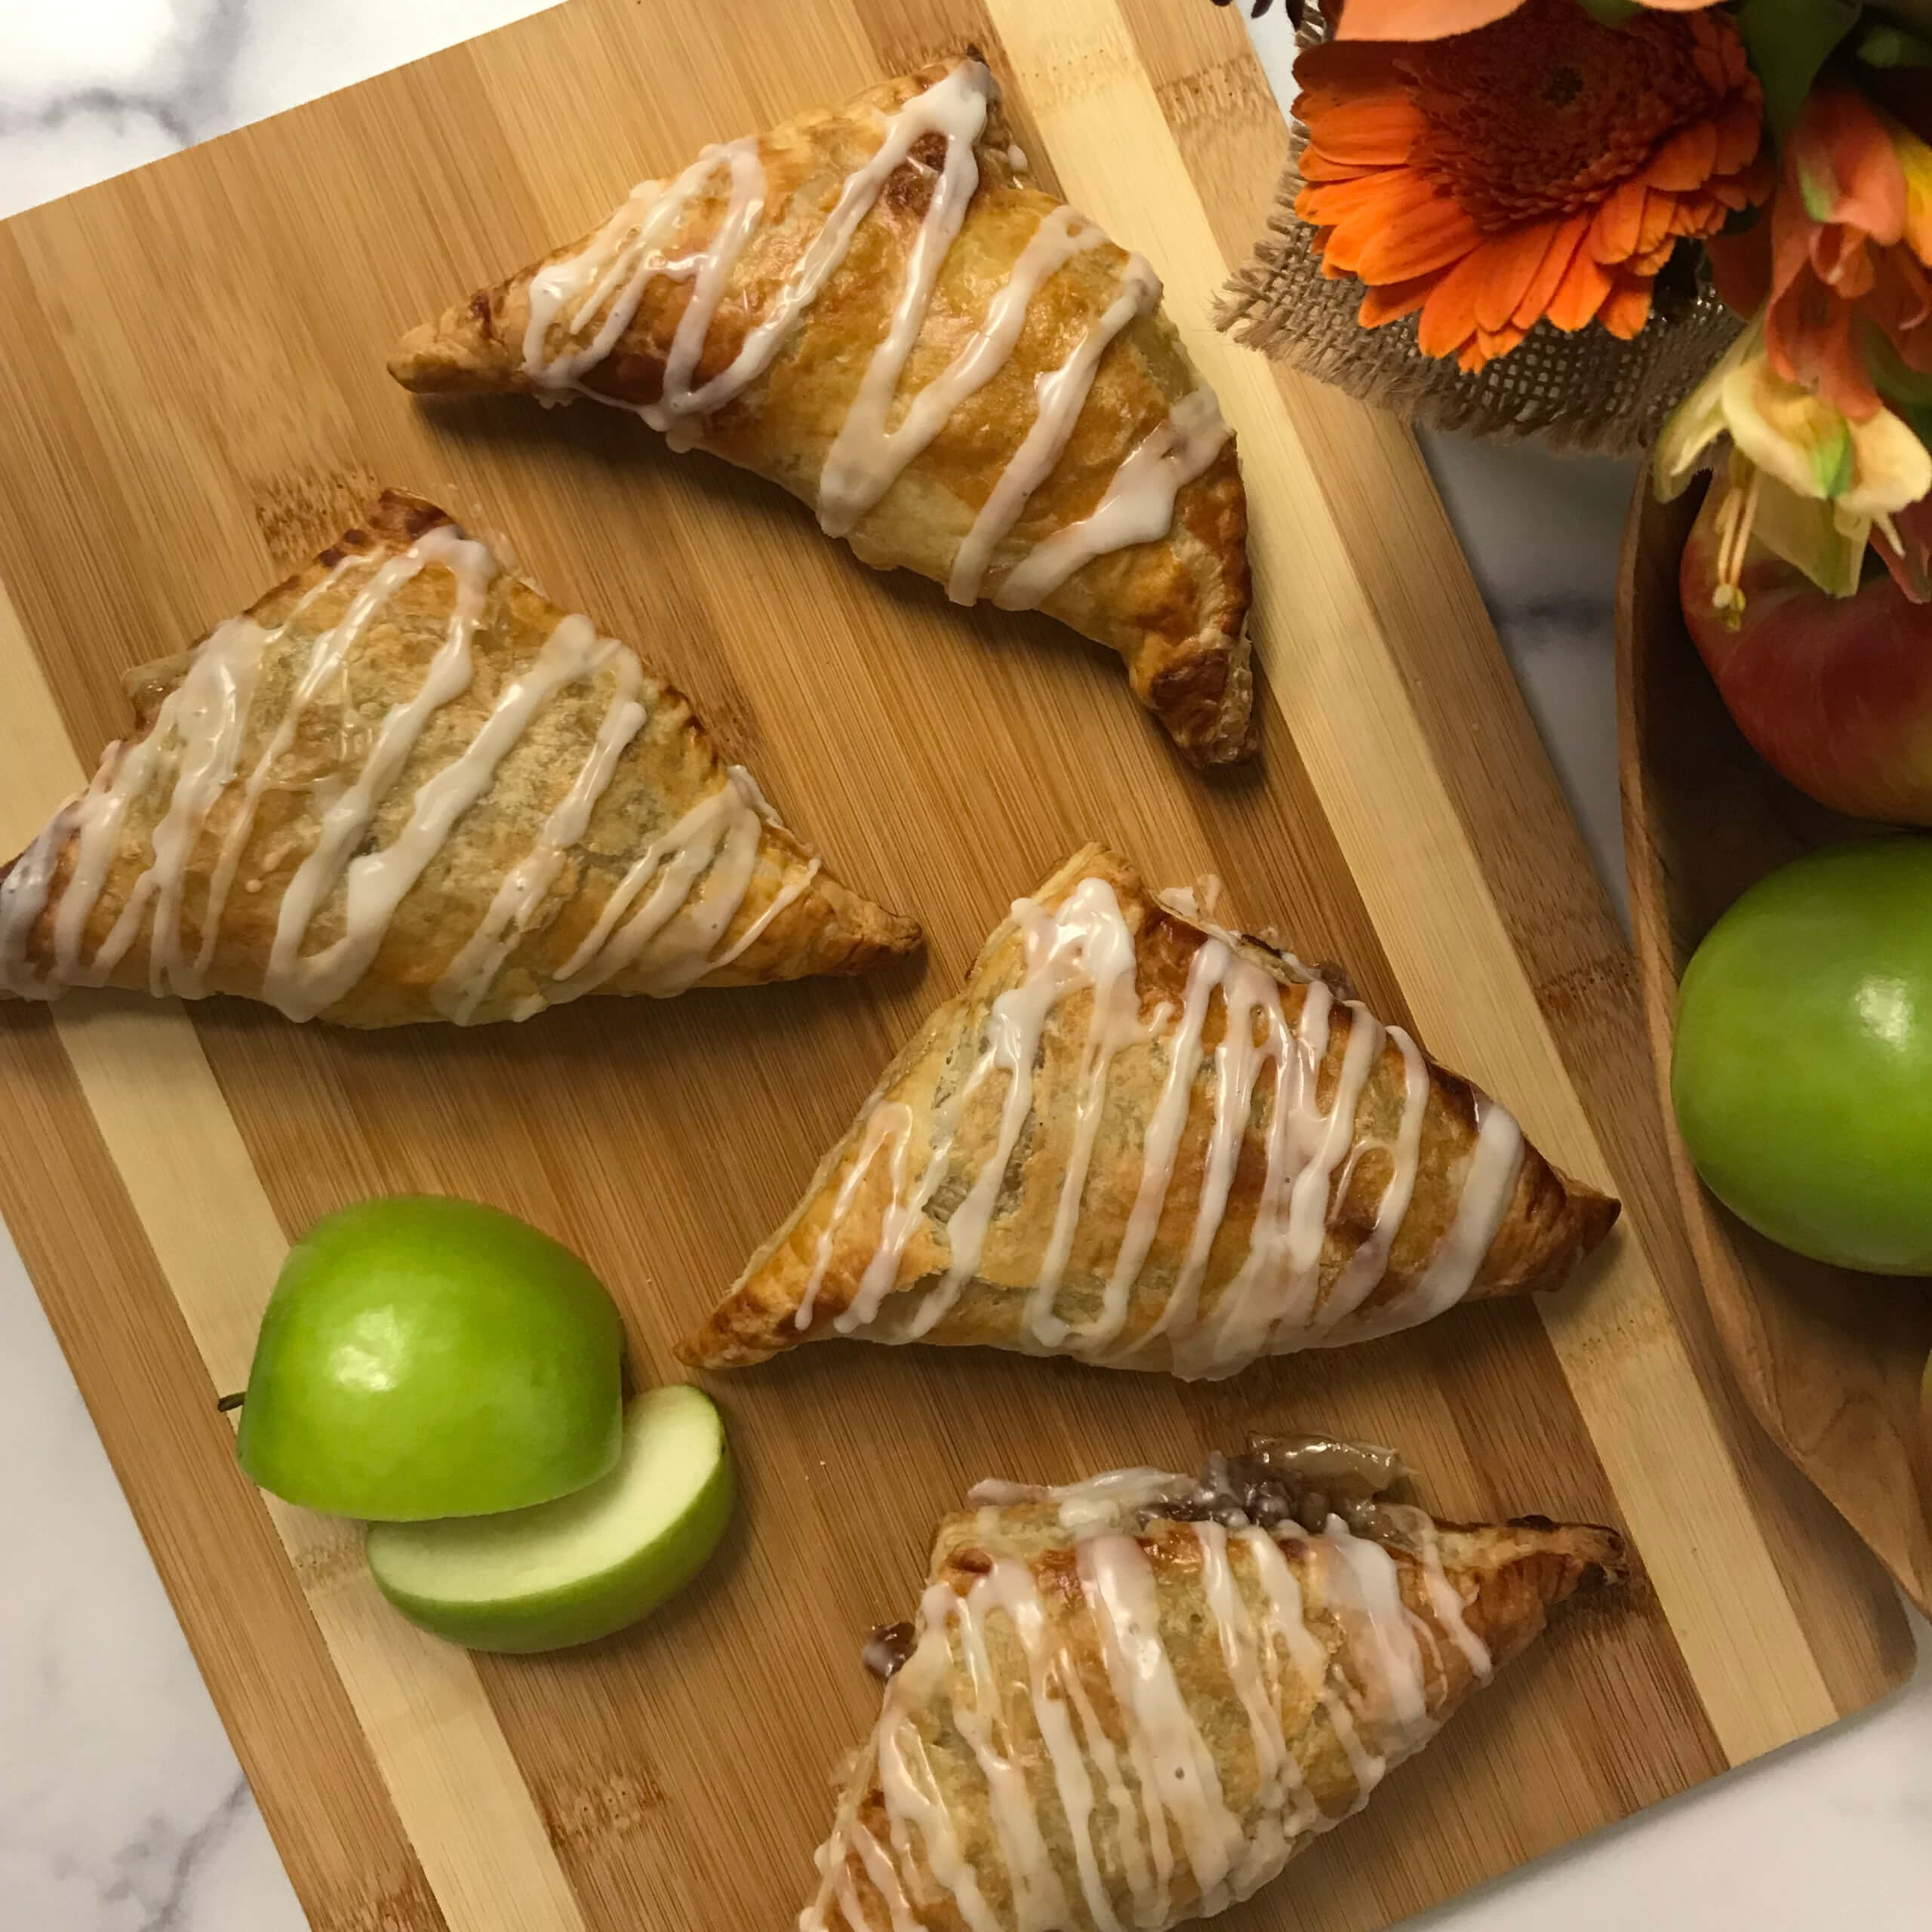 Apple Turnovers | My Curated Tastes